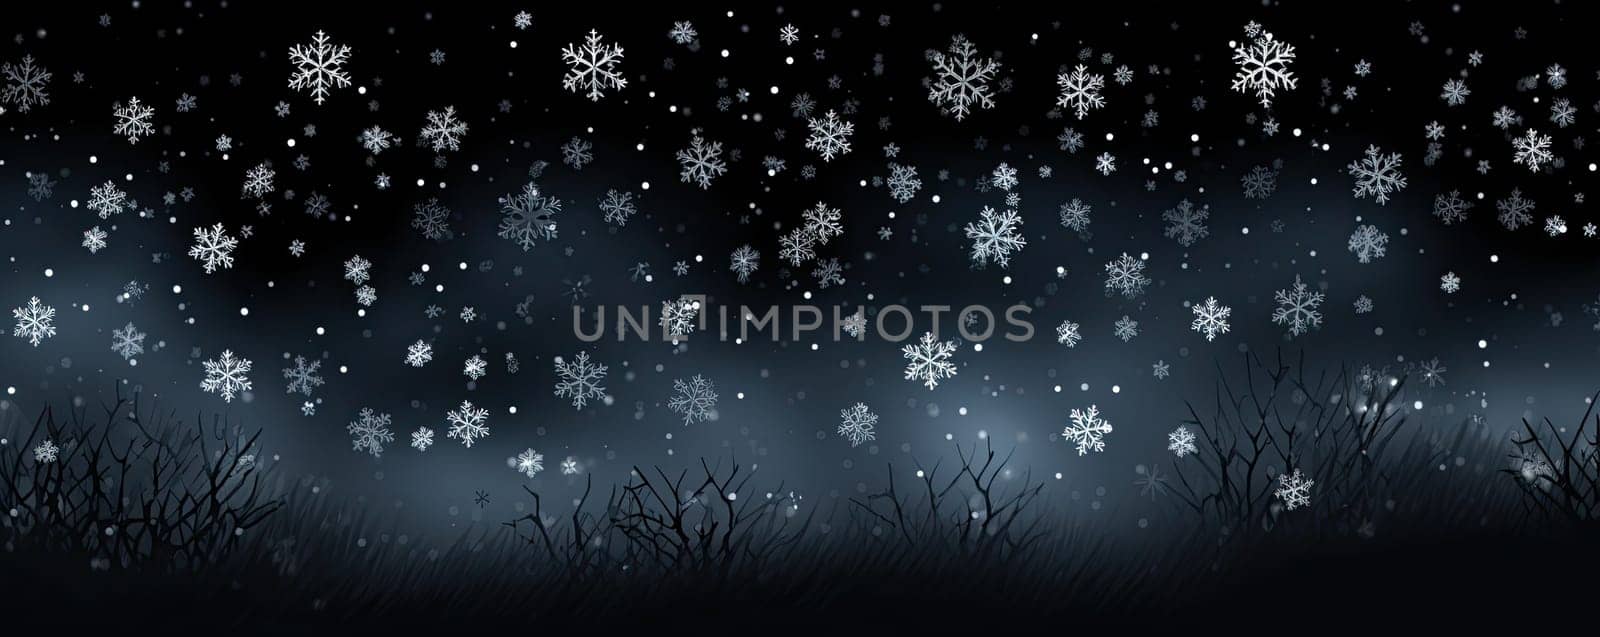 winter border, snow night. Falling snowflakes on dark blue background. Snowfall illustration by papatonic